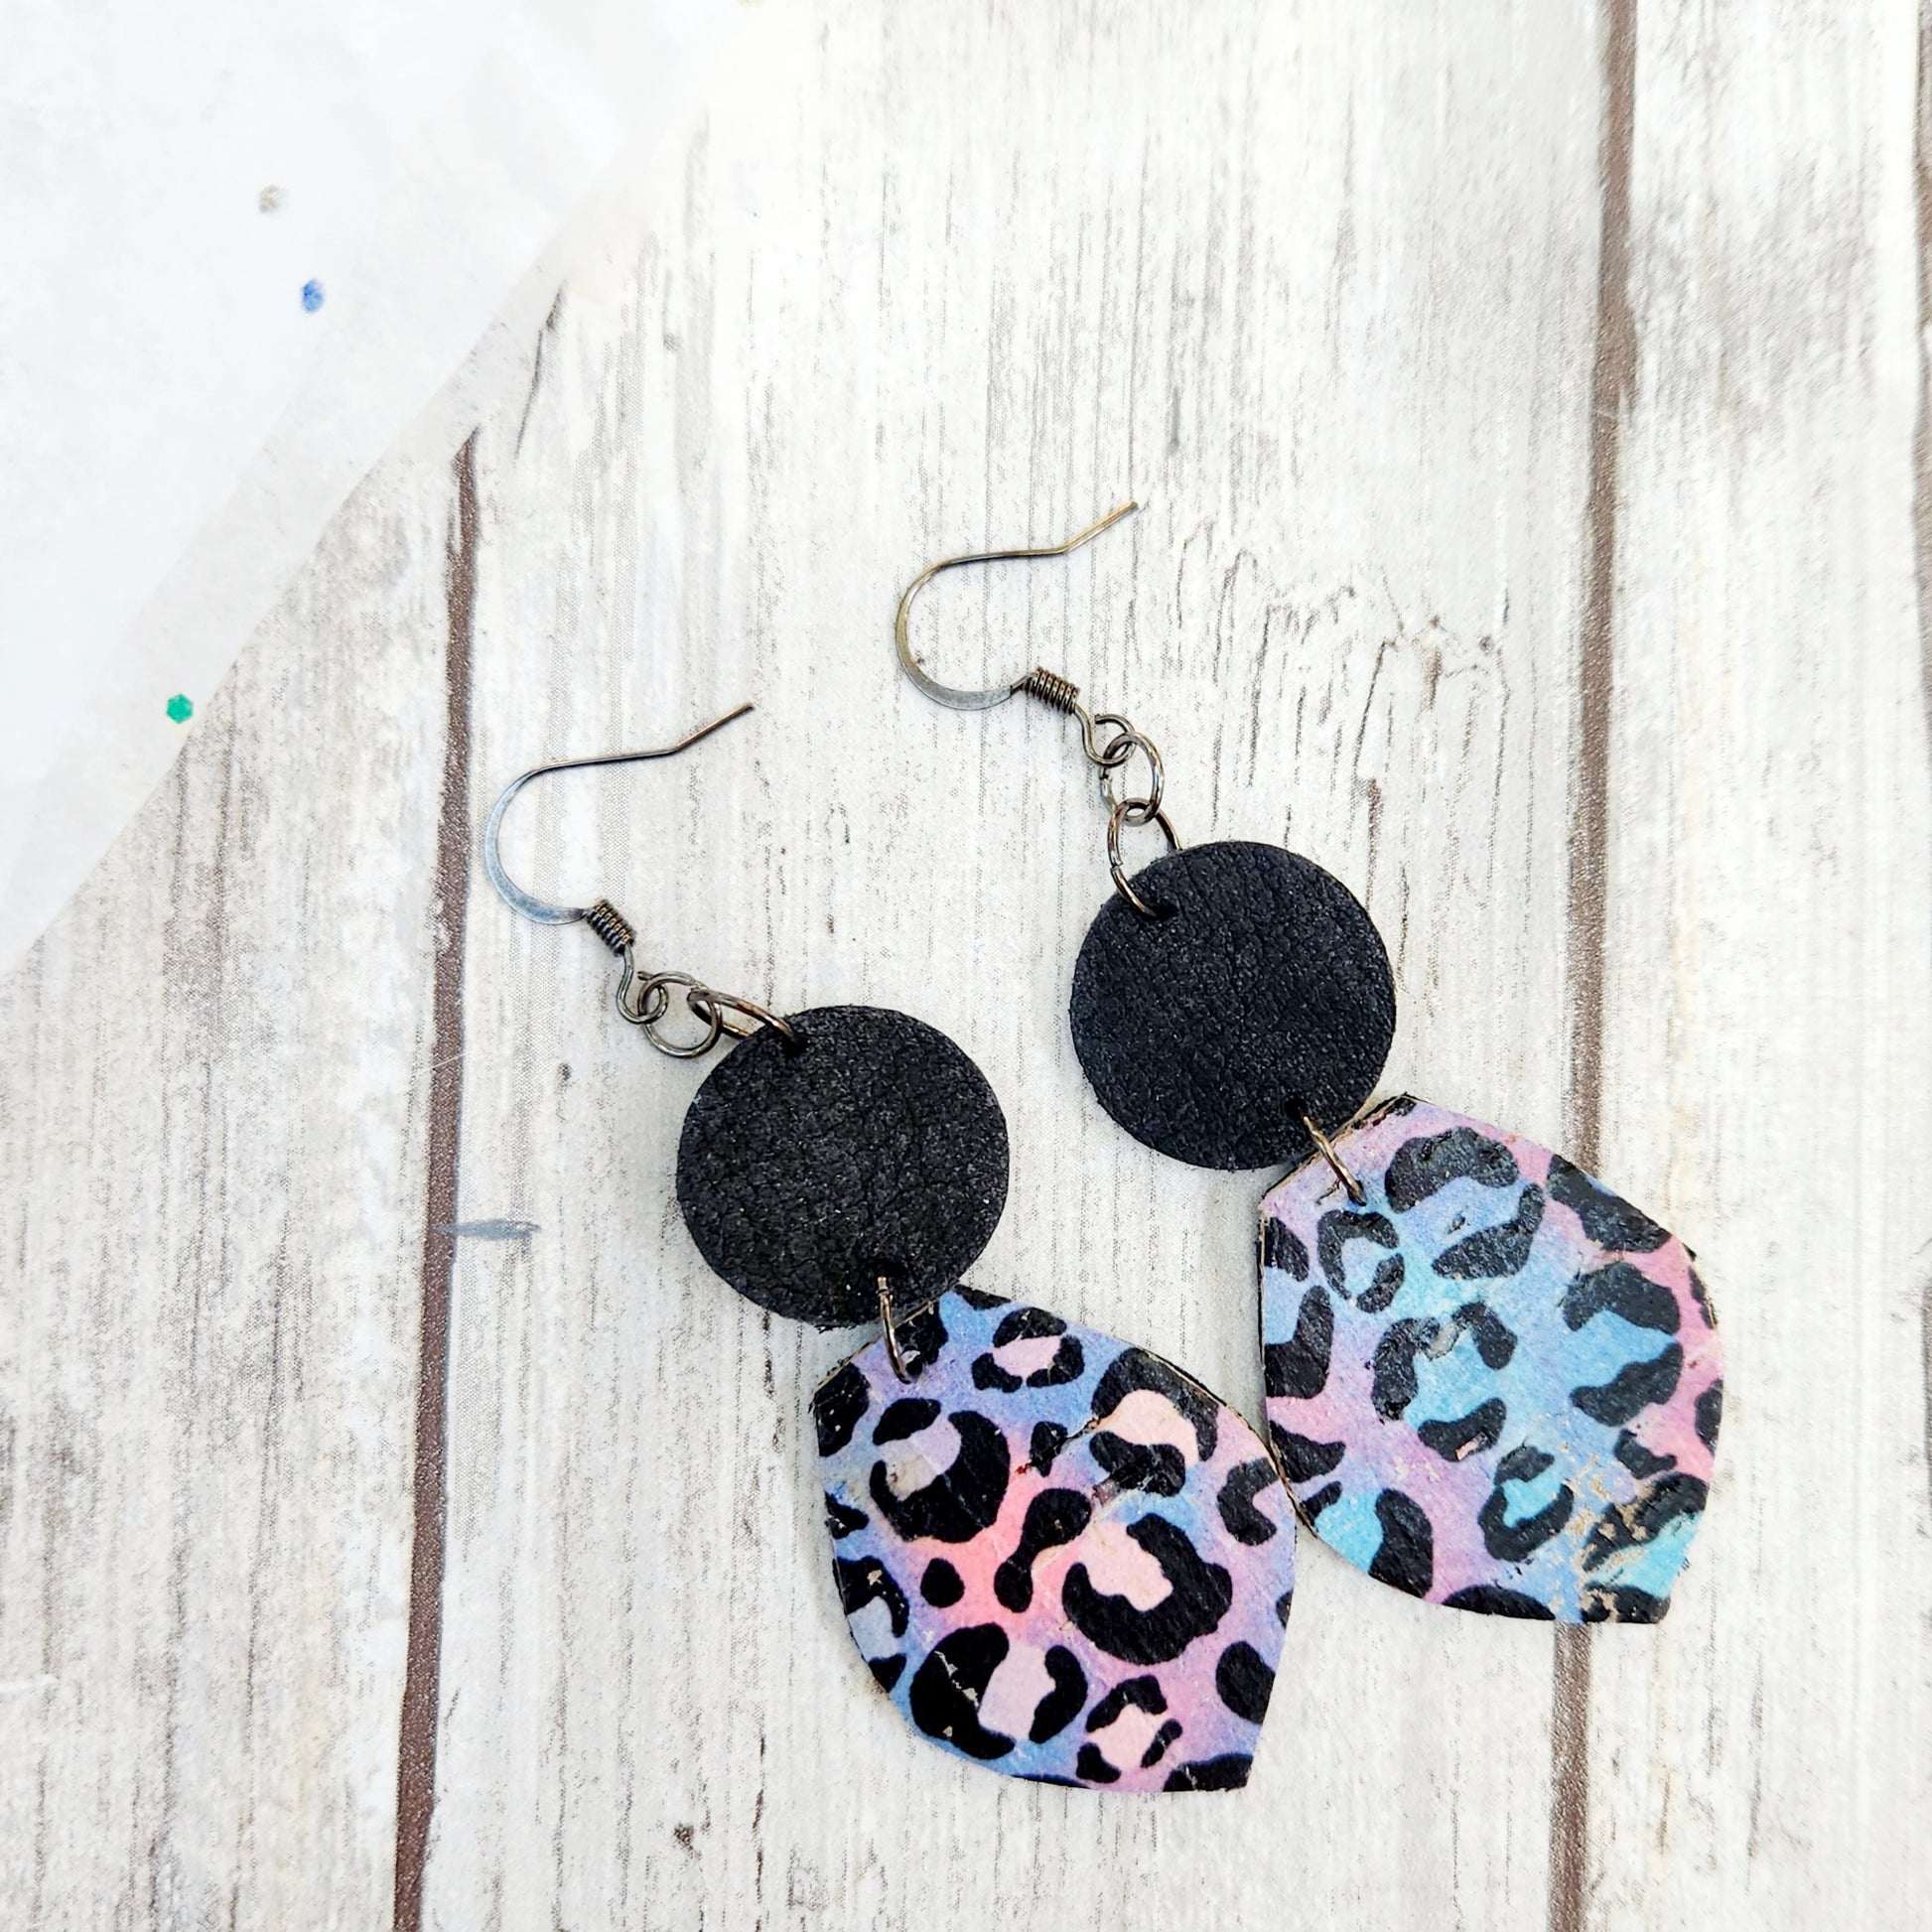 Lisa, black leather circles holding up cork on leather petals with a pink, blue and purple swirled background and black leopard print. 